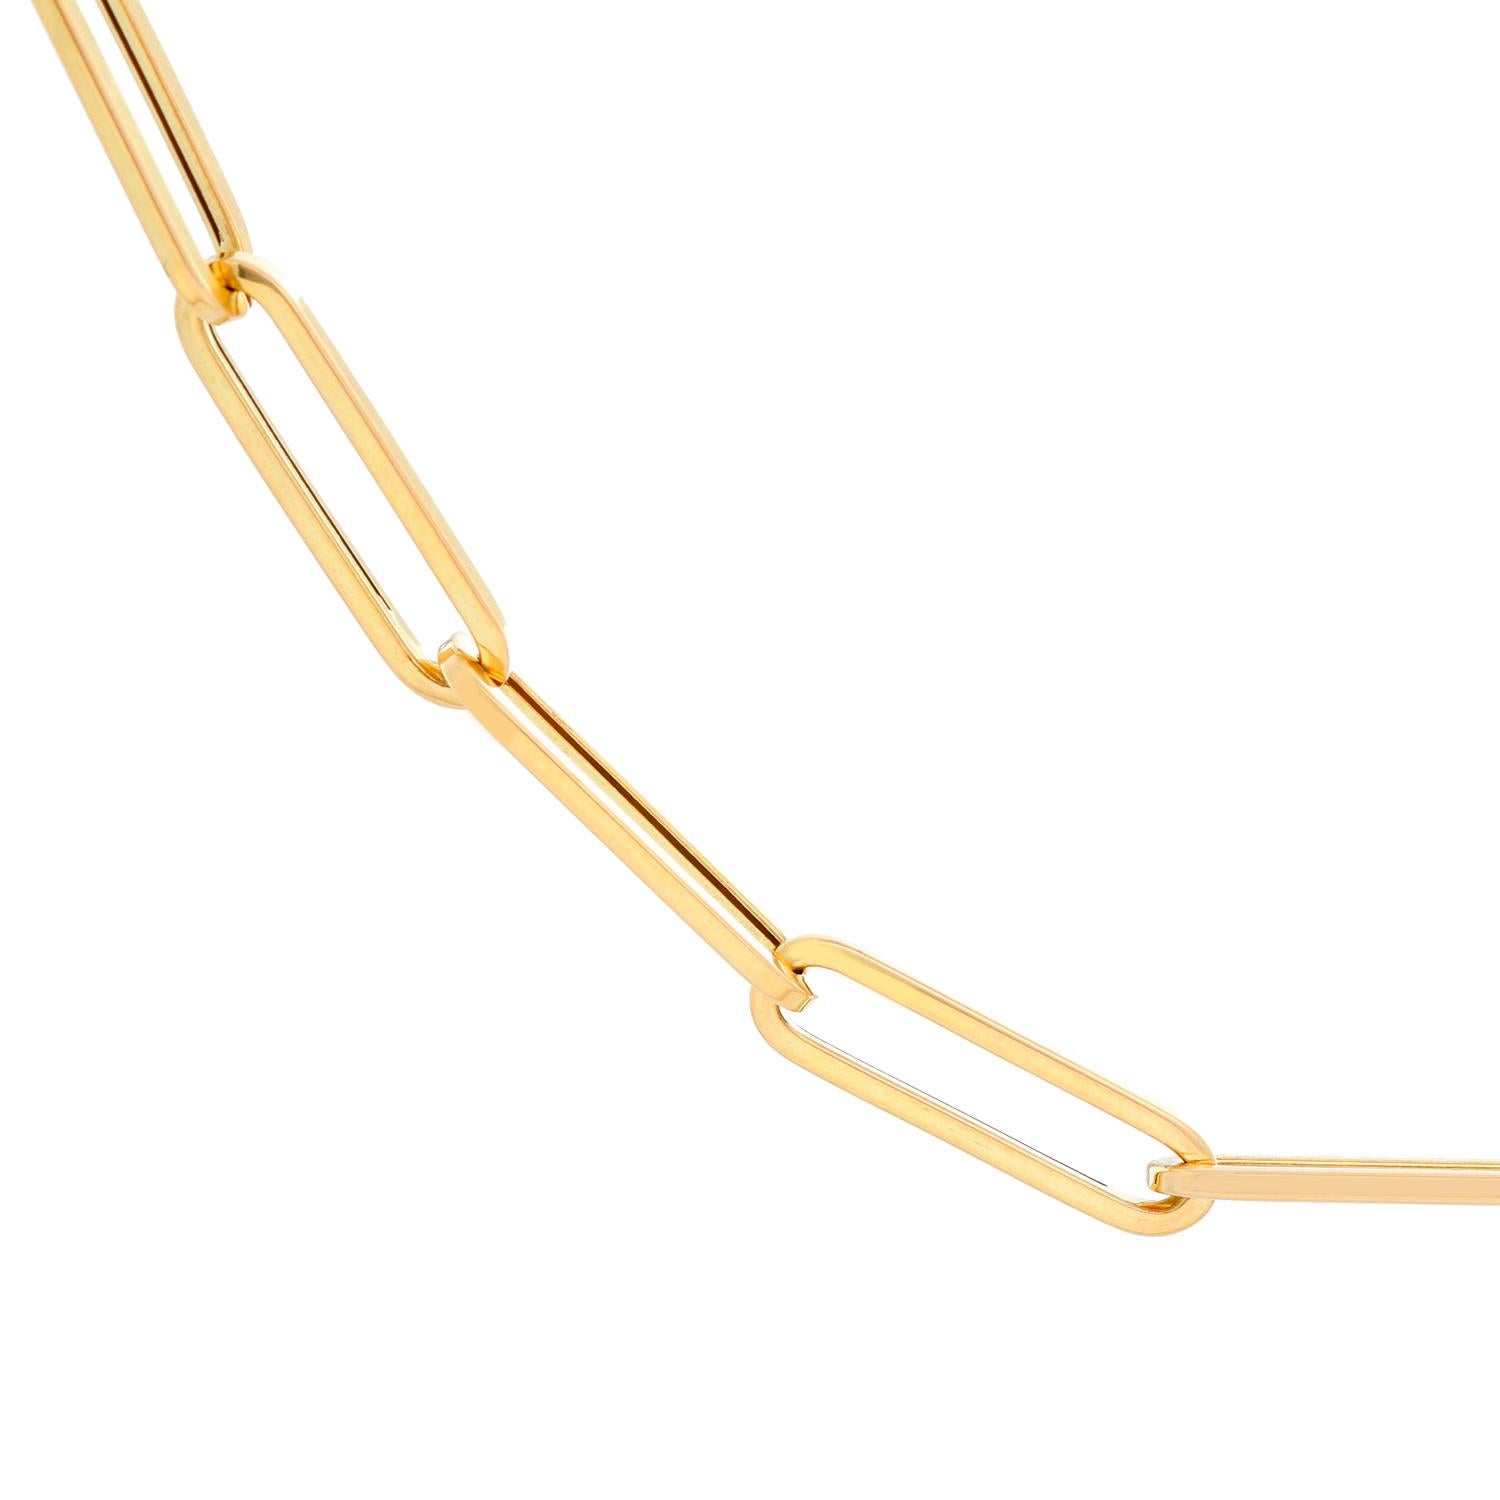 14K Yellow Gold Paper Clip Chain Necklace  - Gold filled paper clip cable link chain bracelet. Length size 35 inches. Can be sized down.  Perfect for layering or worn alone. Total weight 20.34 grams.